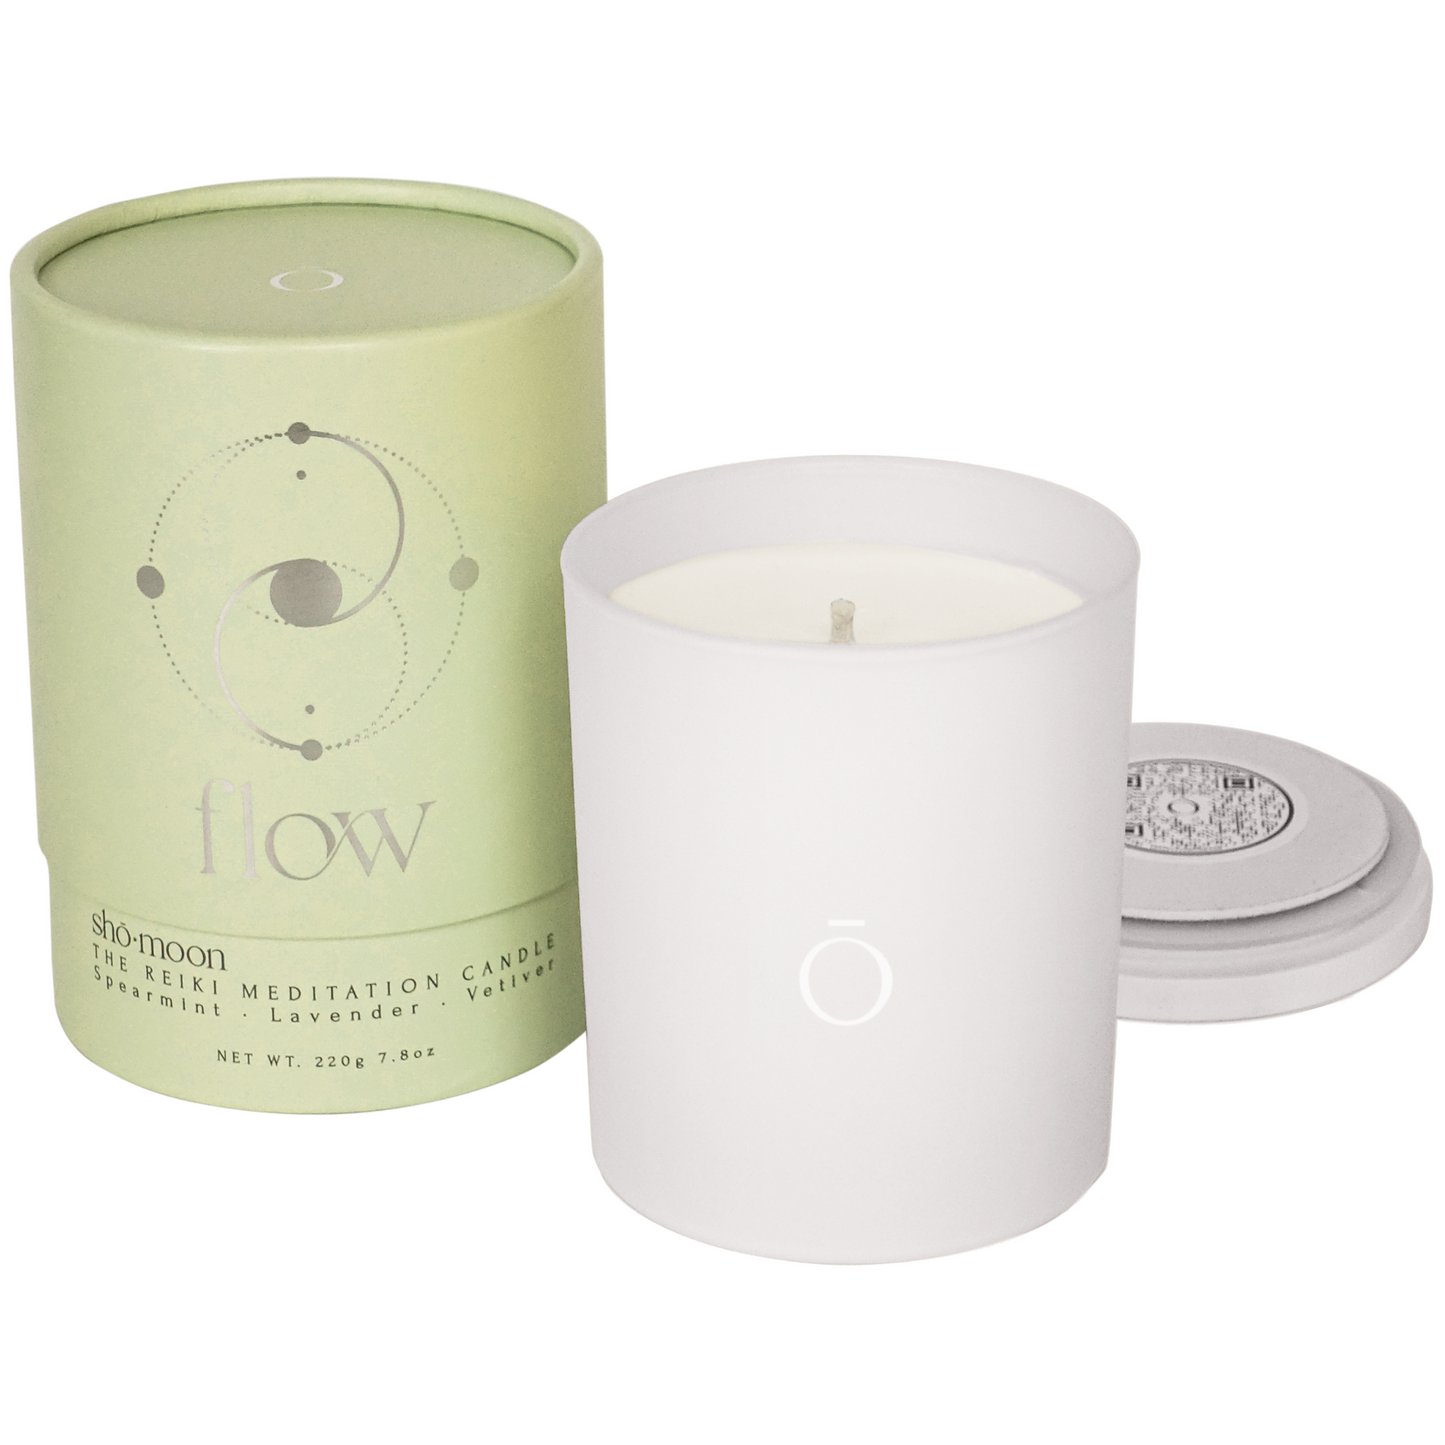 Shō-moon Flow Meditation Candle with pure essentials oils and clean burning and natural wax